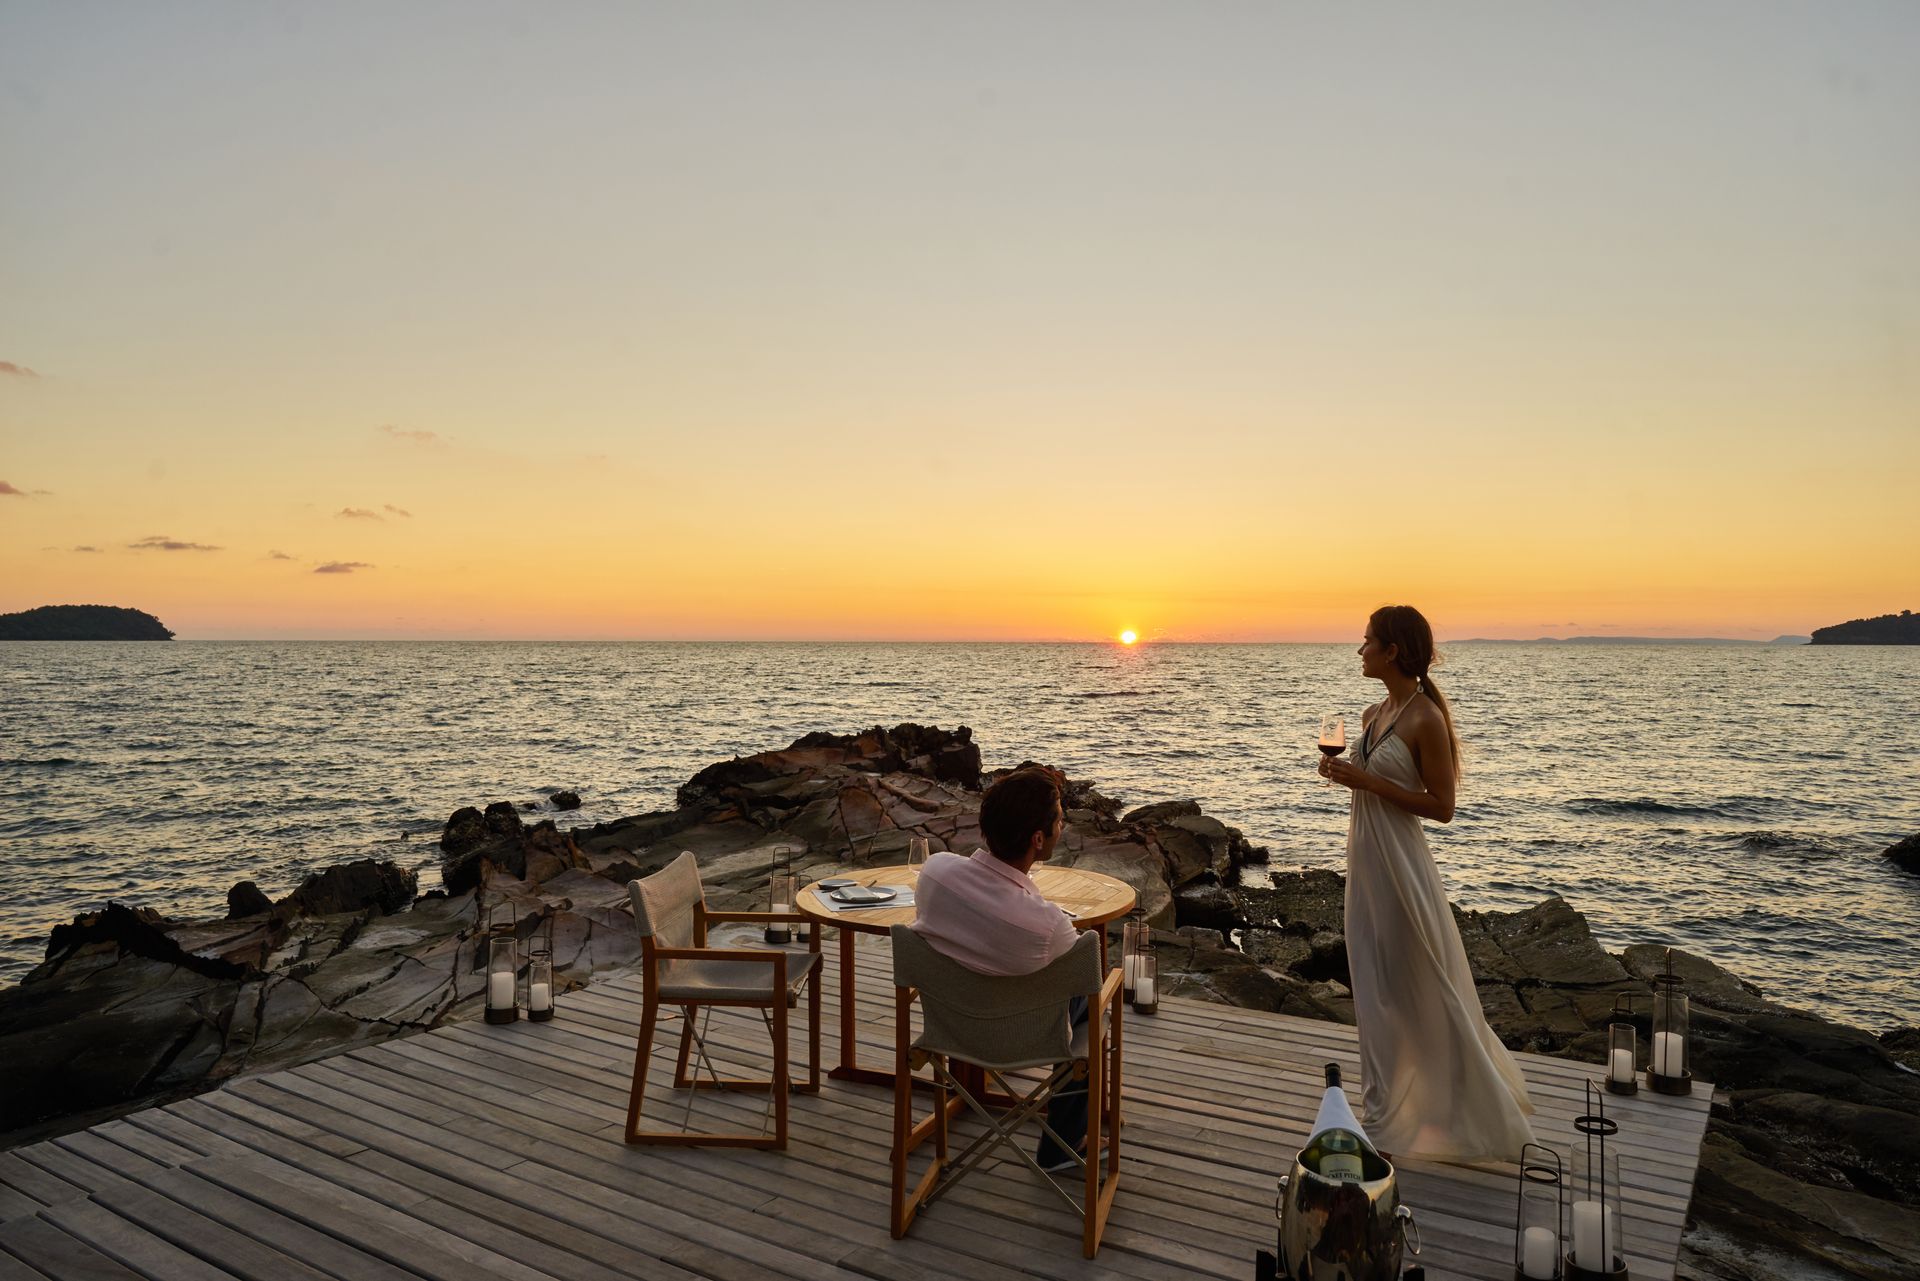 A man and a woman are sitting at a table by the ocean at sunset.